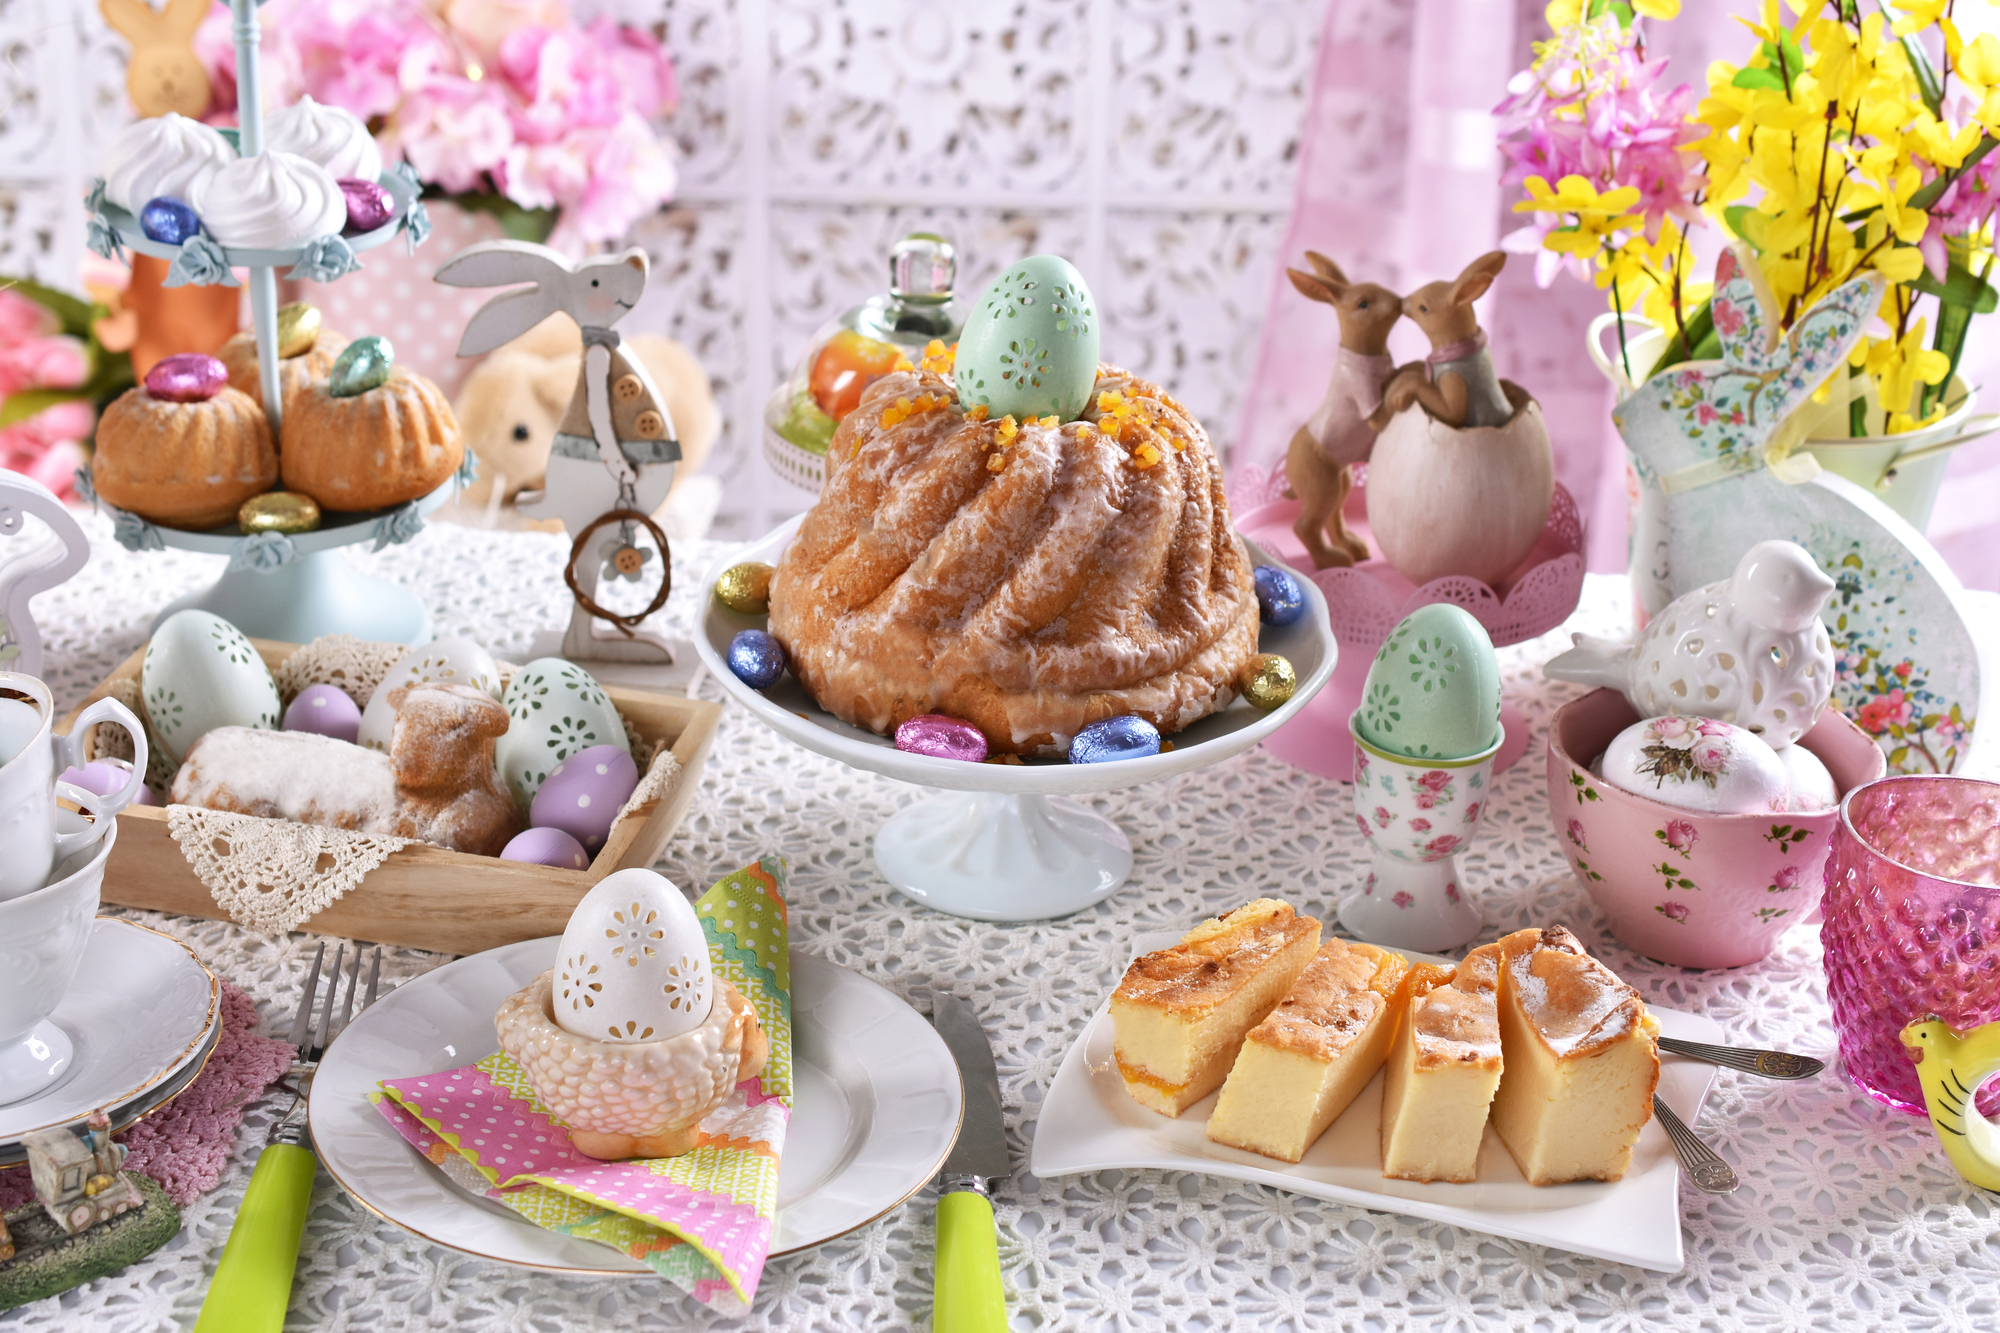 14 Traditional Polish Easter Recipes